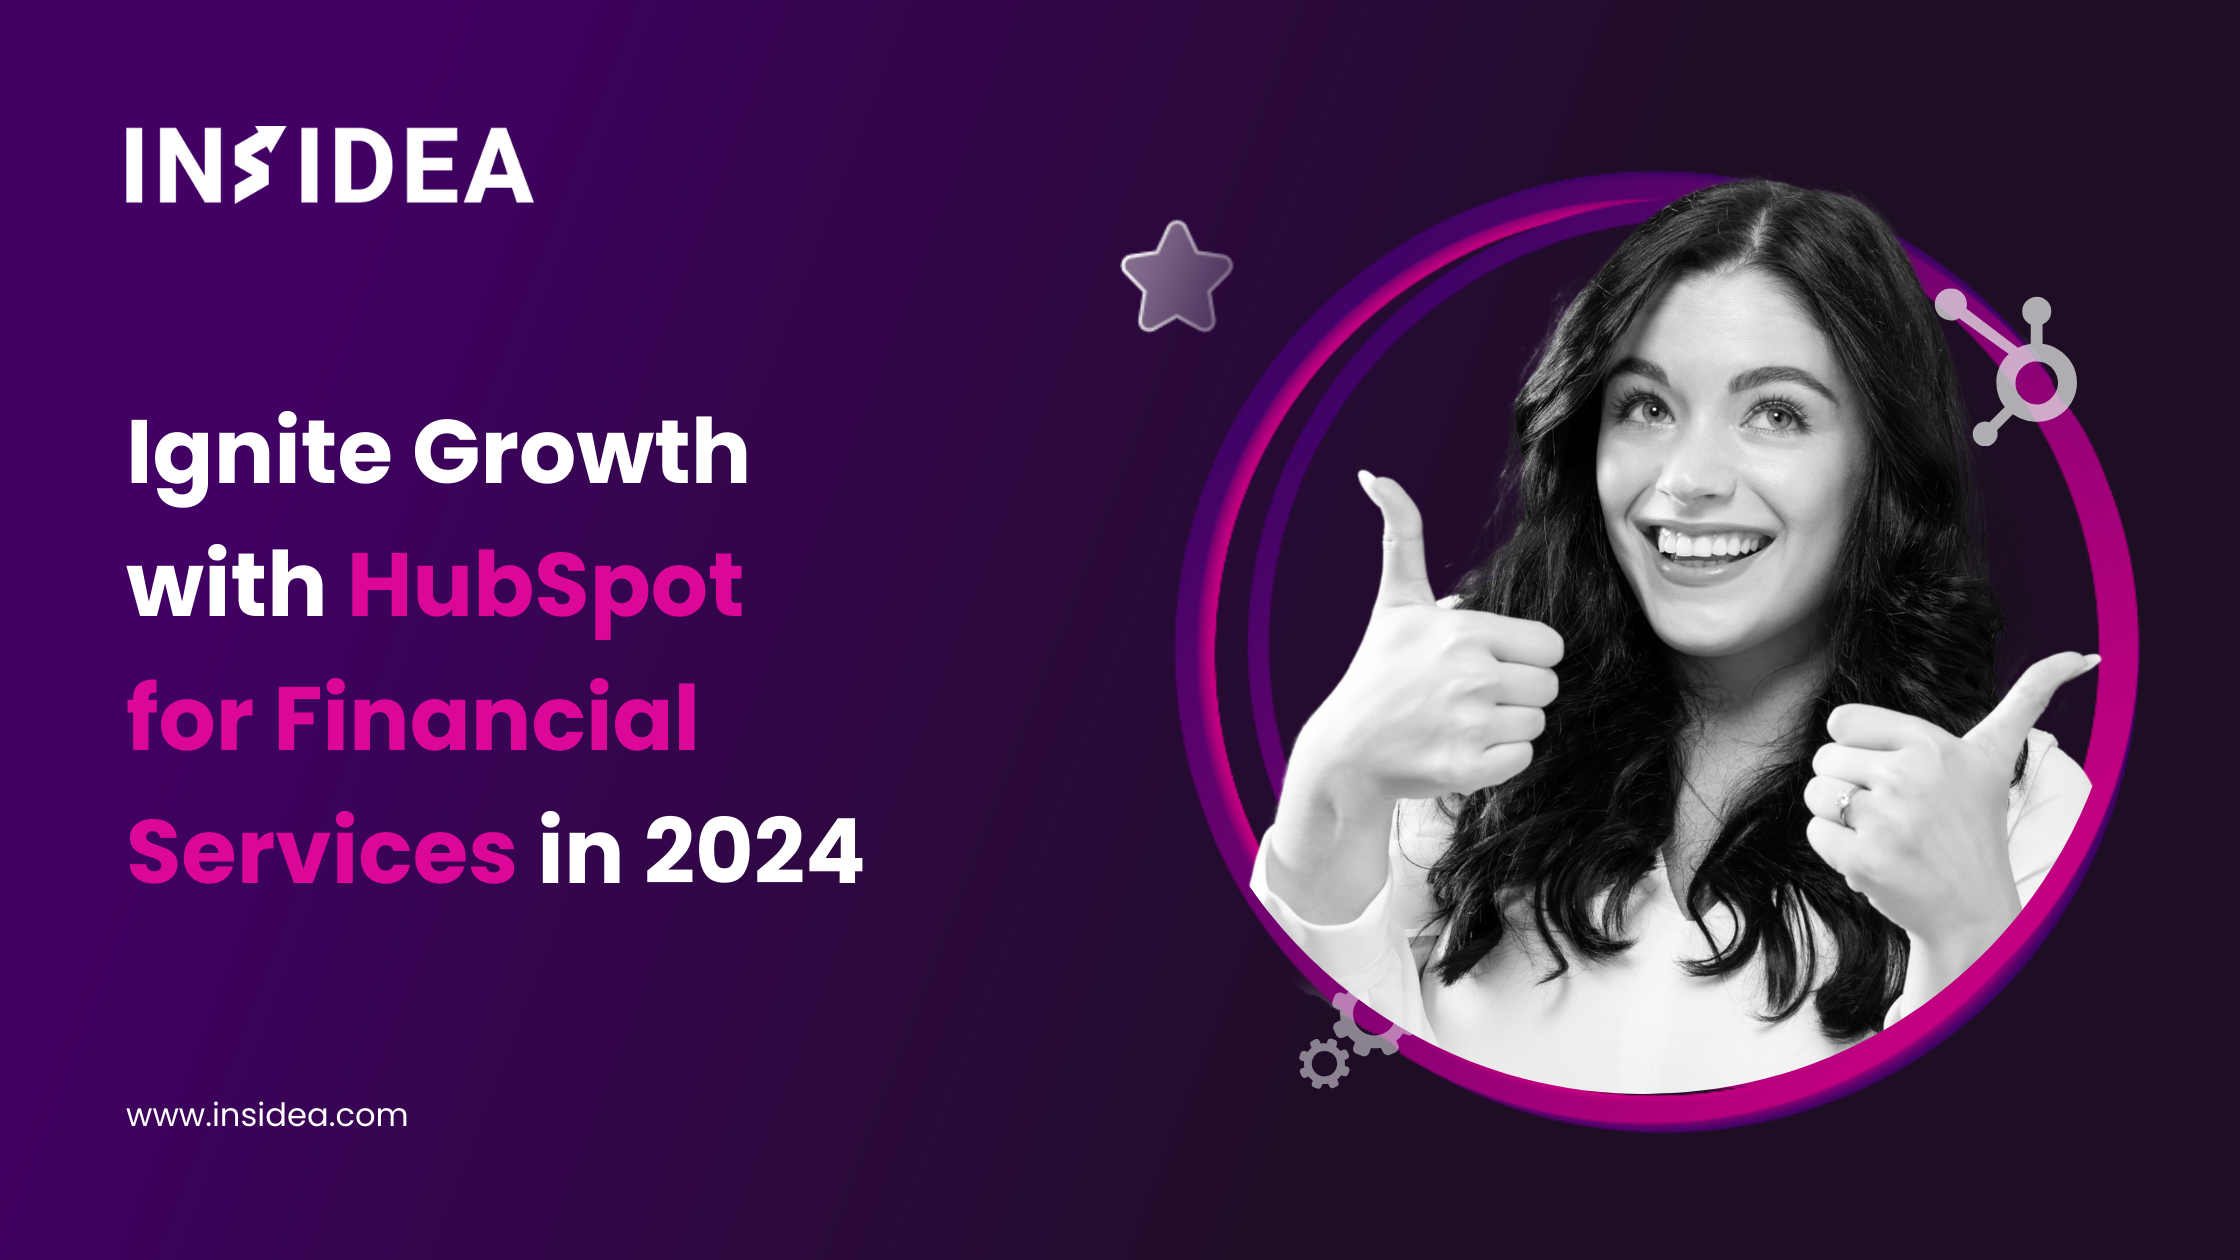 Ignite Growth with HubSpot for Financial Services in 2024